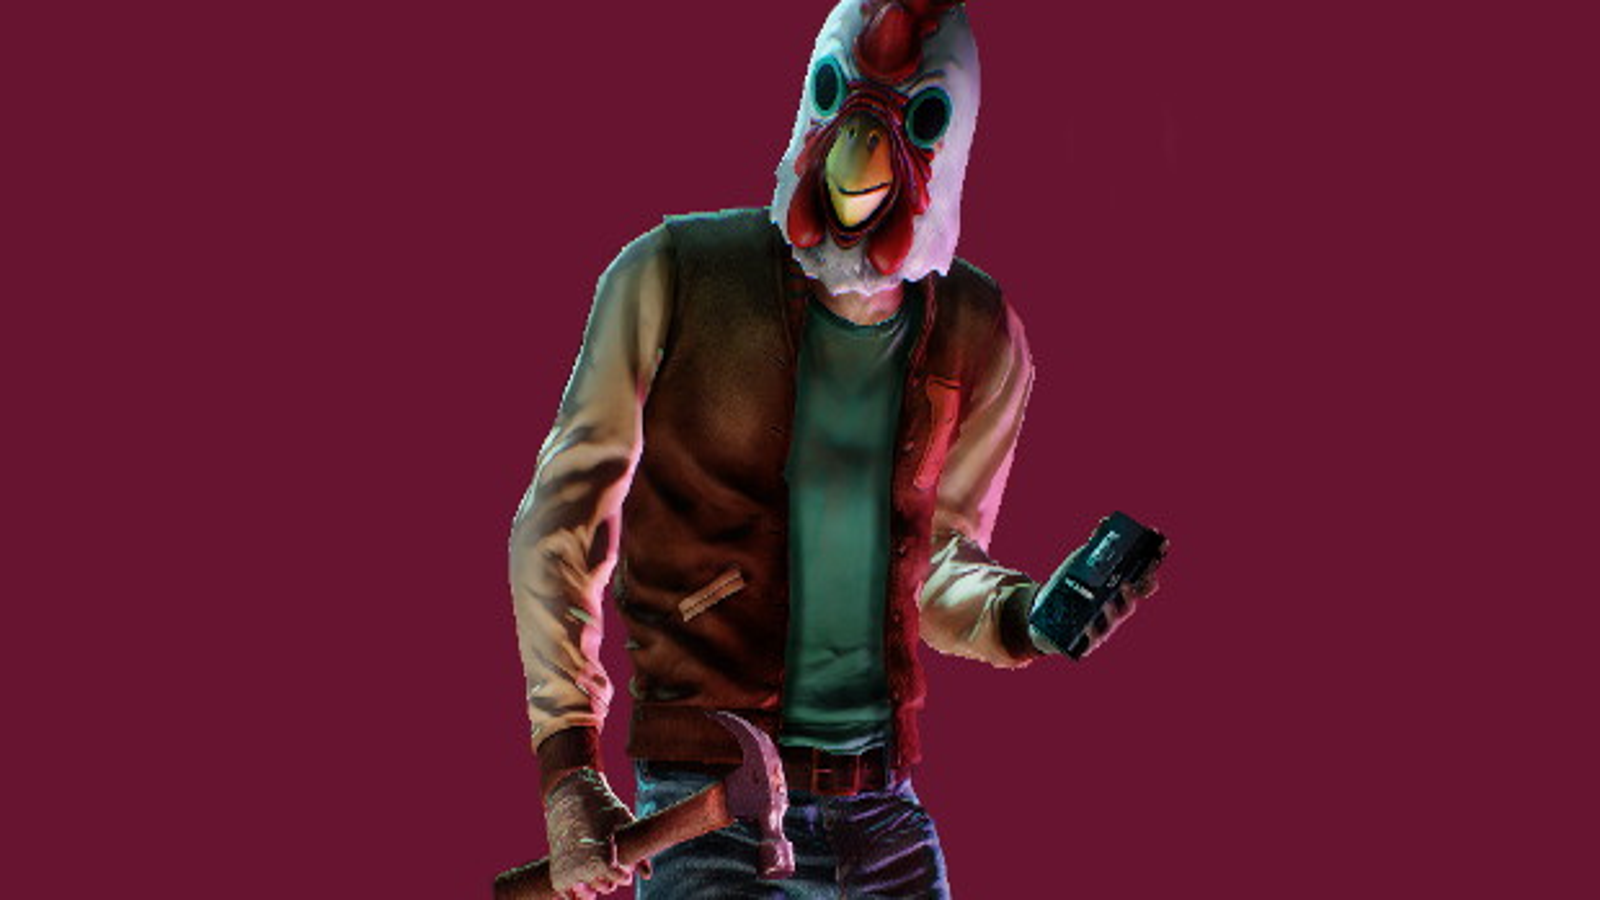 Jacket from payday 2 фото 73